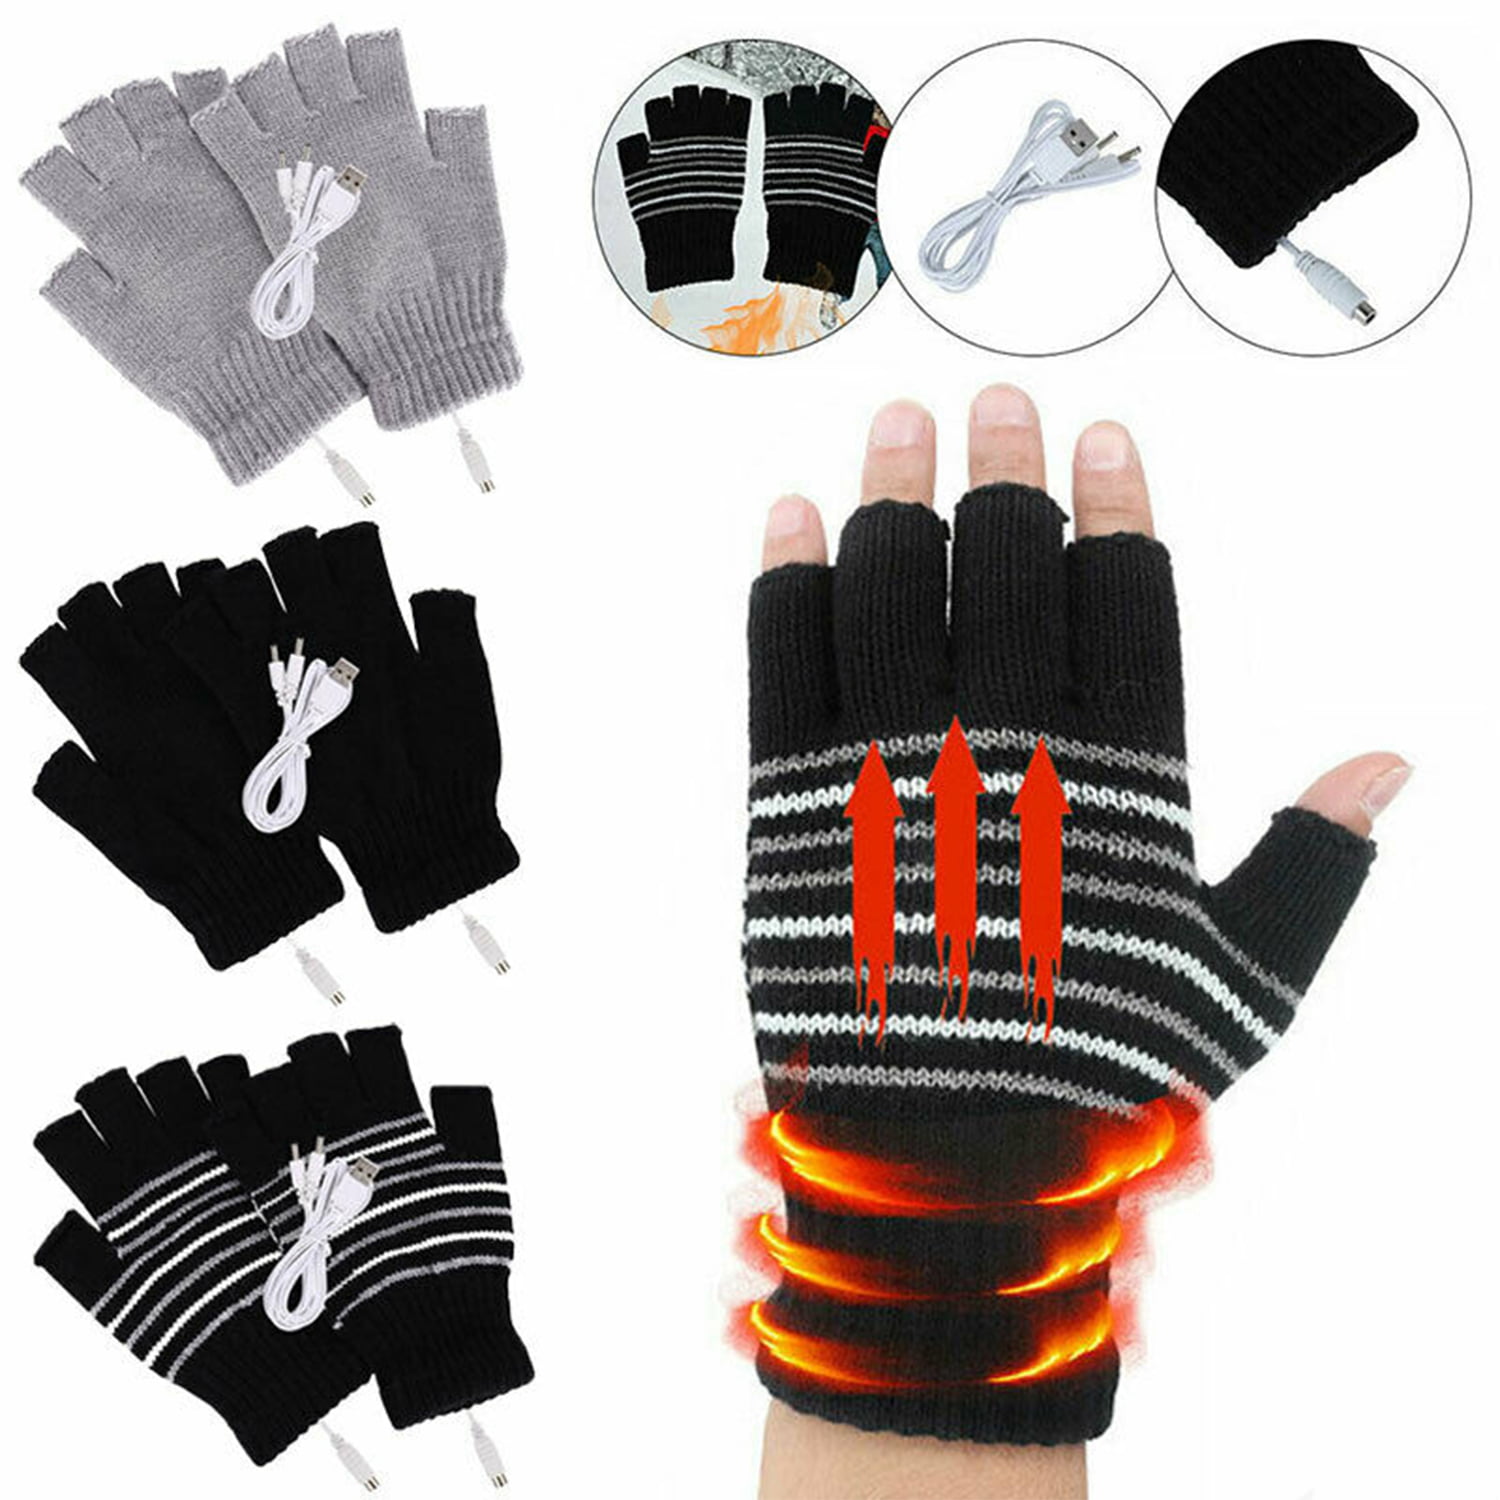 5V Electric Heated Gloves Rechargeable Insulated Thermal Full&Half Gloves Unisex 